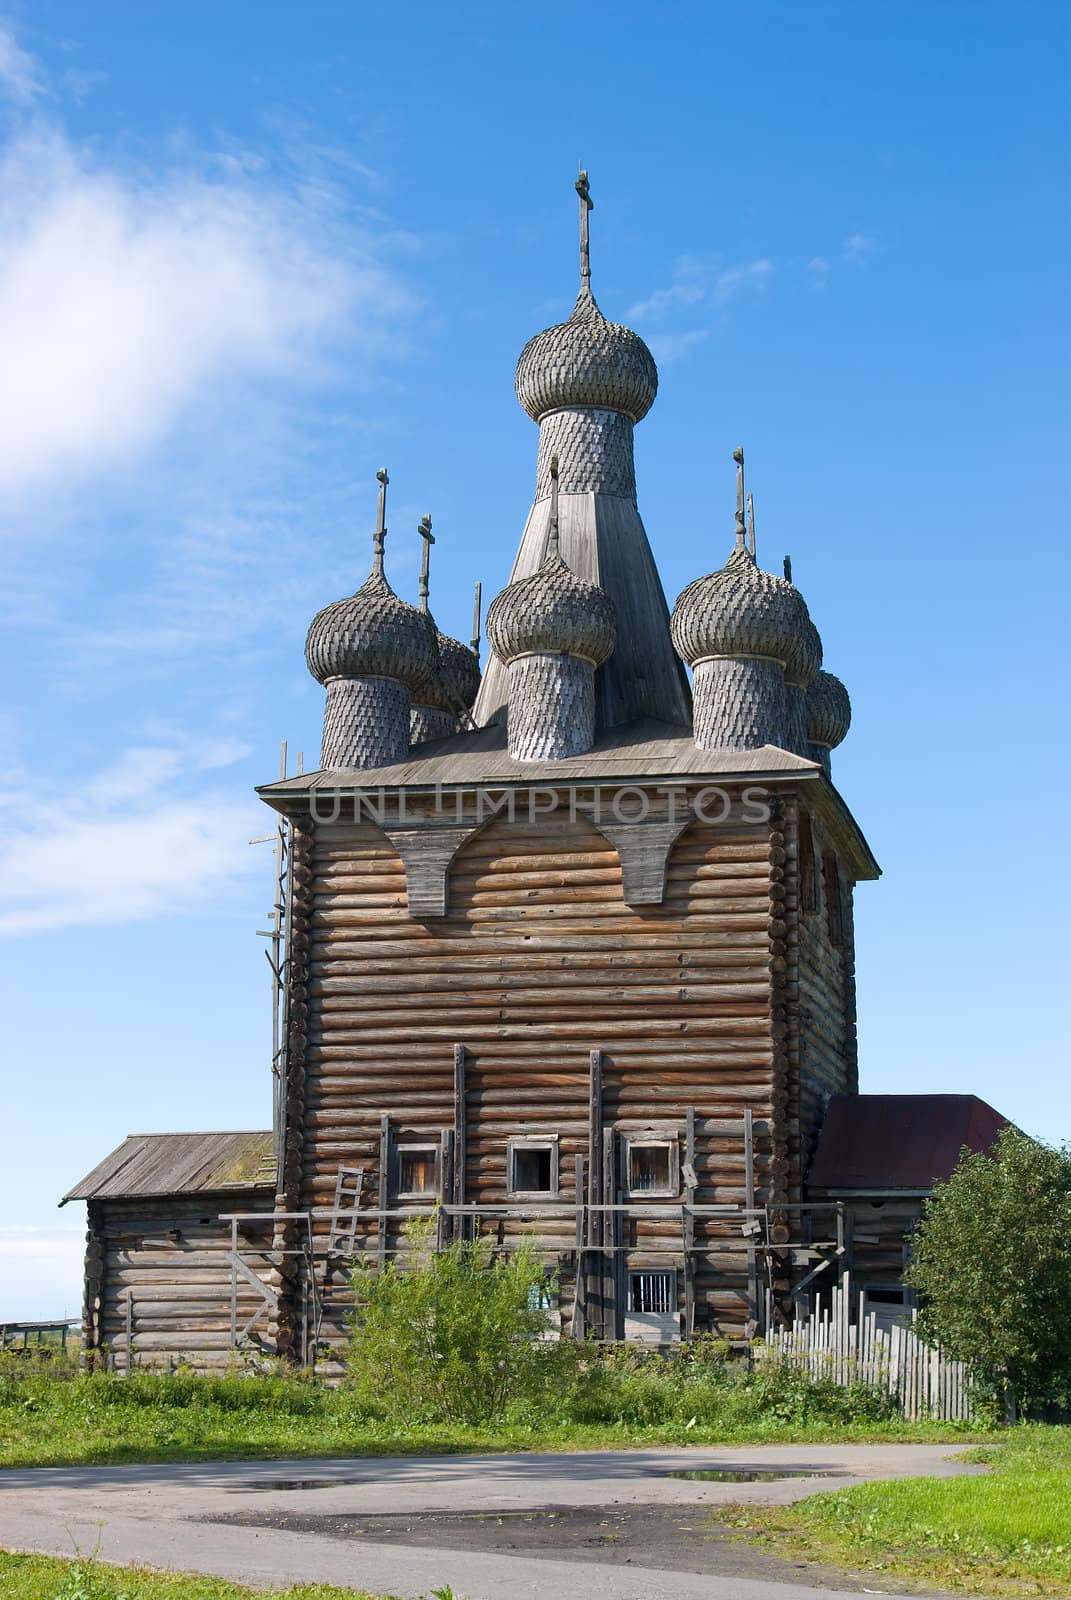 The Traditions of the russian north.The Old-time wooden church. Ancient architecture